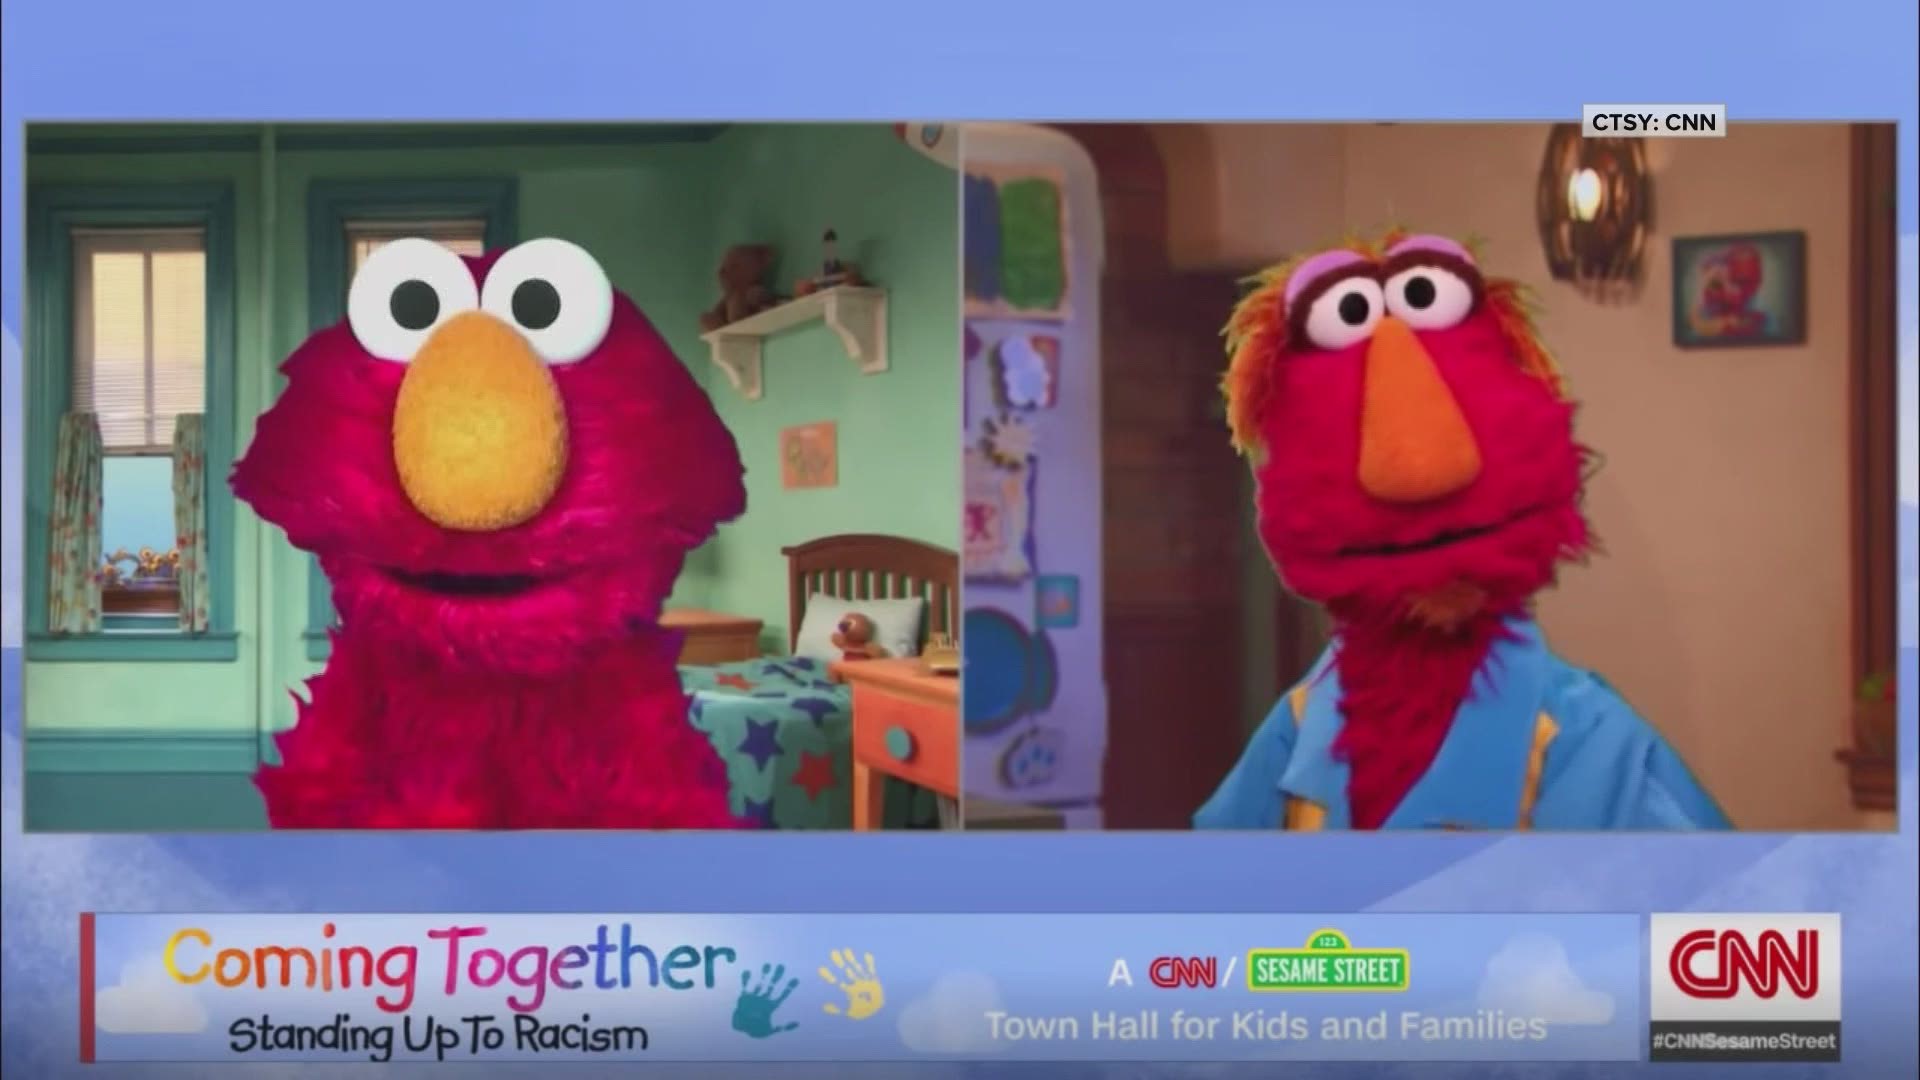 The "Sesame Street" characters appeared in a virtual town hall event Saturday morning called "Coming Together: Standing Up to Racism."